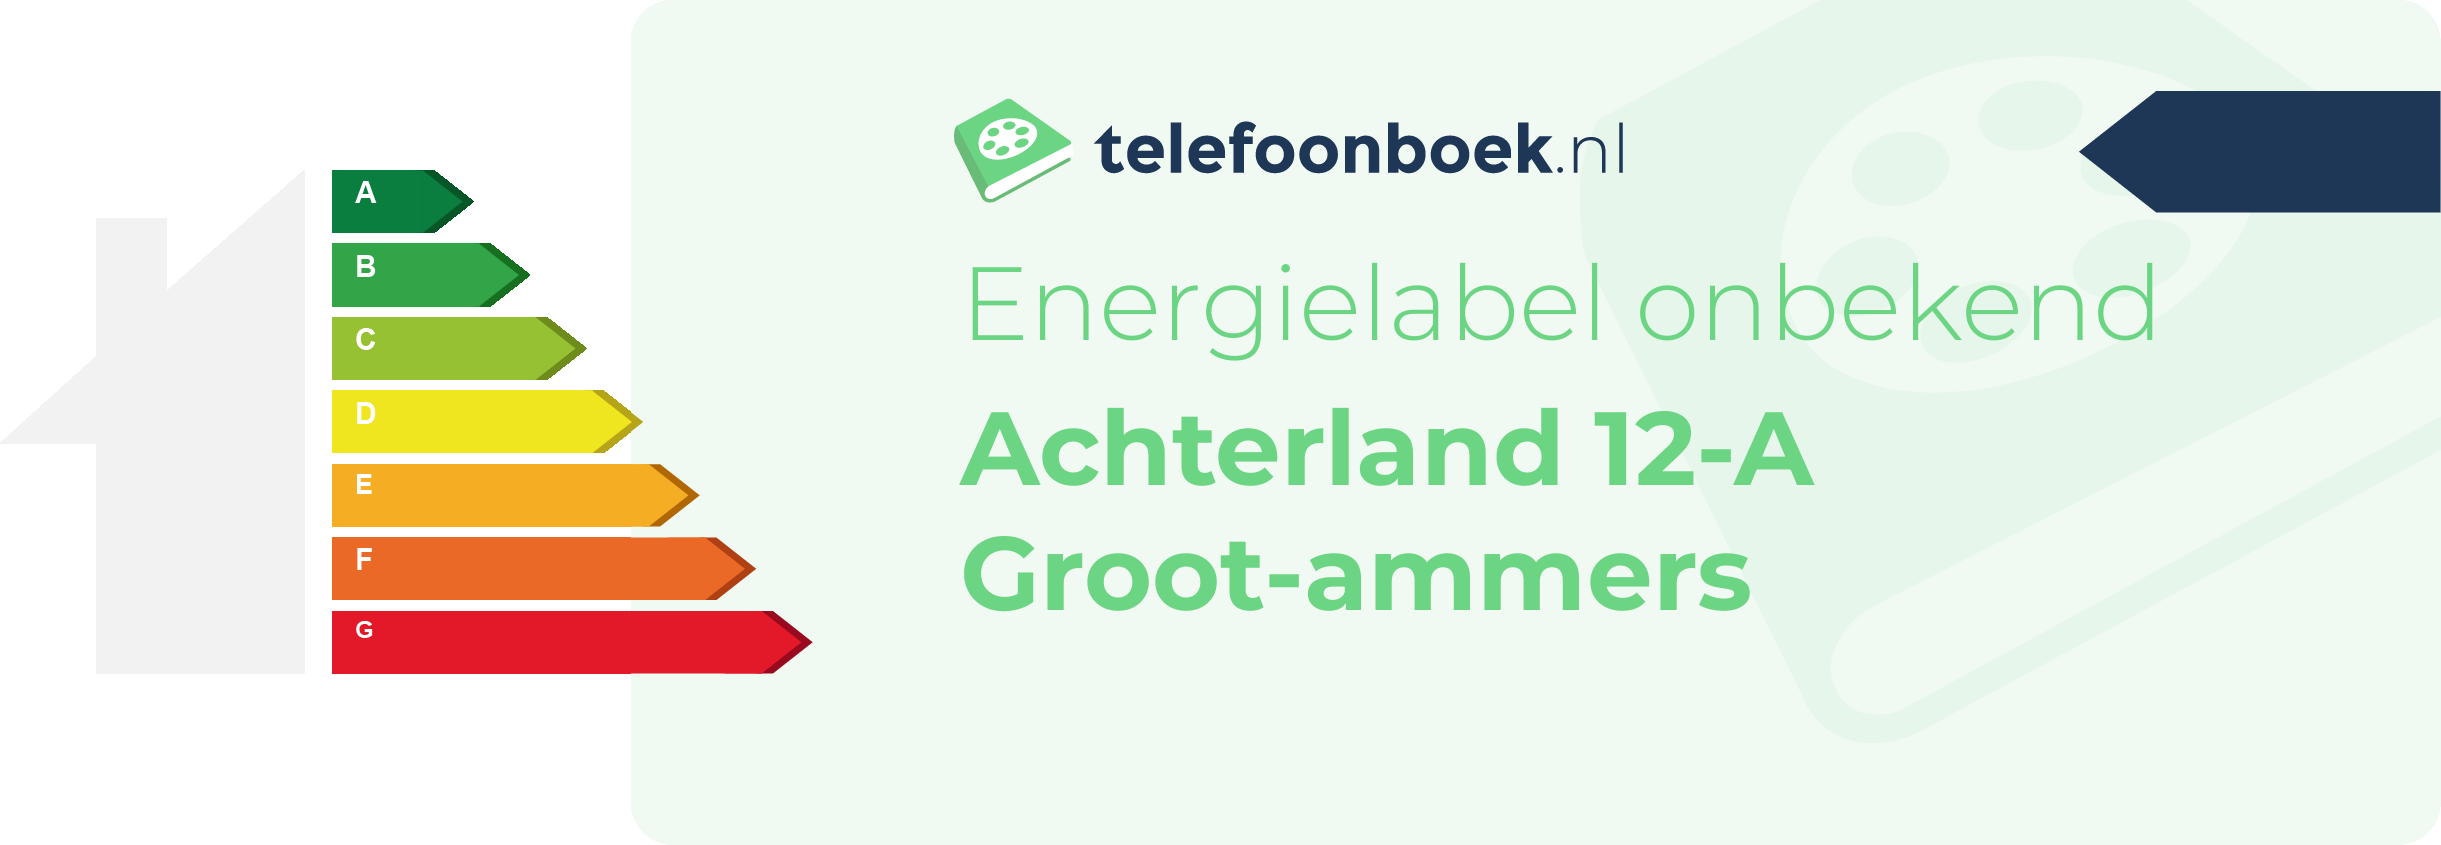 Energielabel Achterland 12-A Groot-Ammers